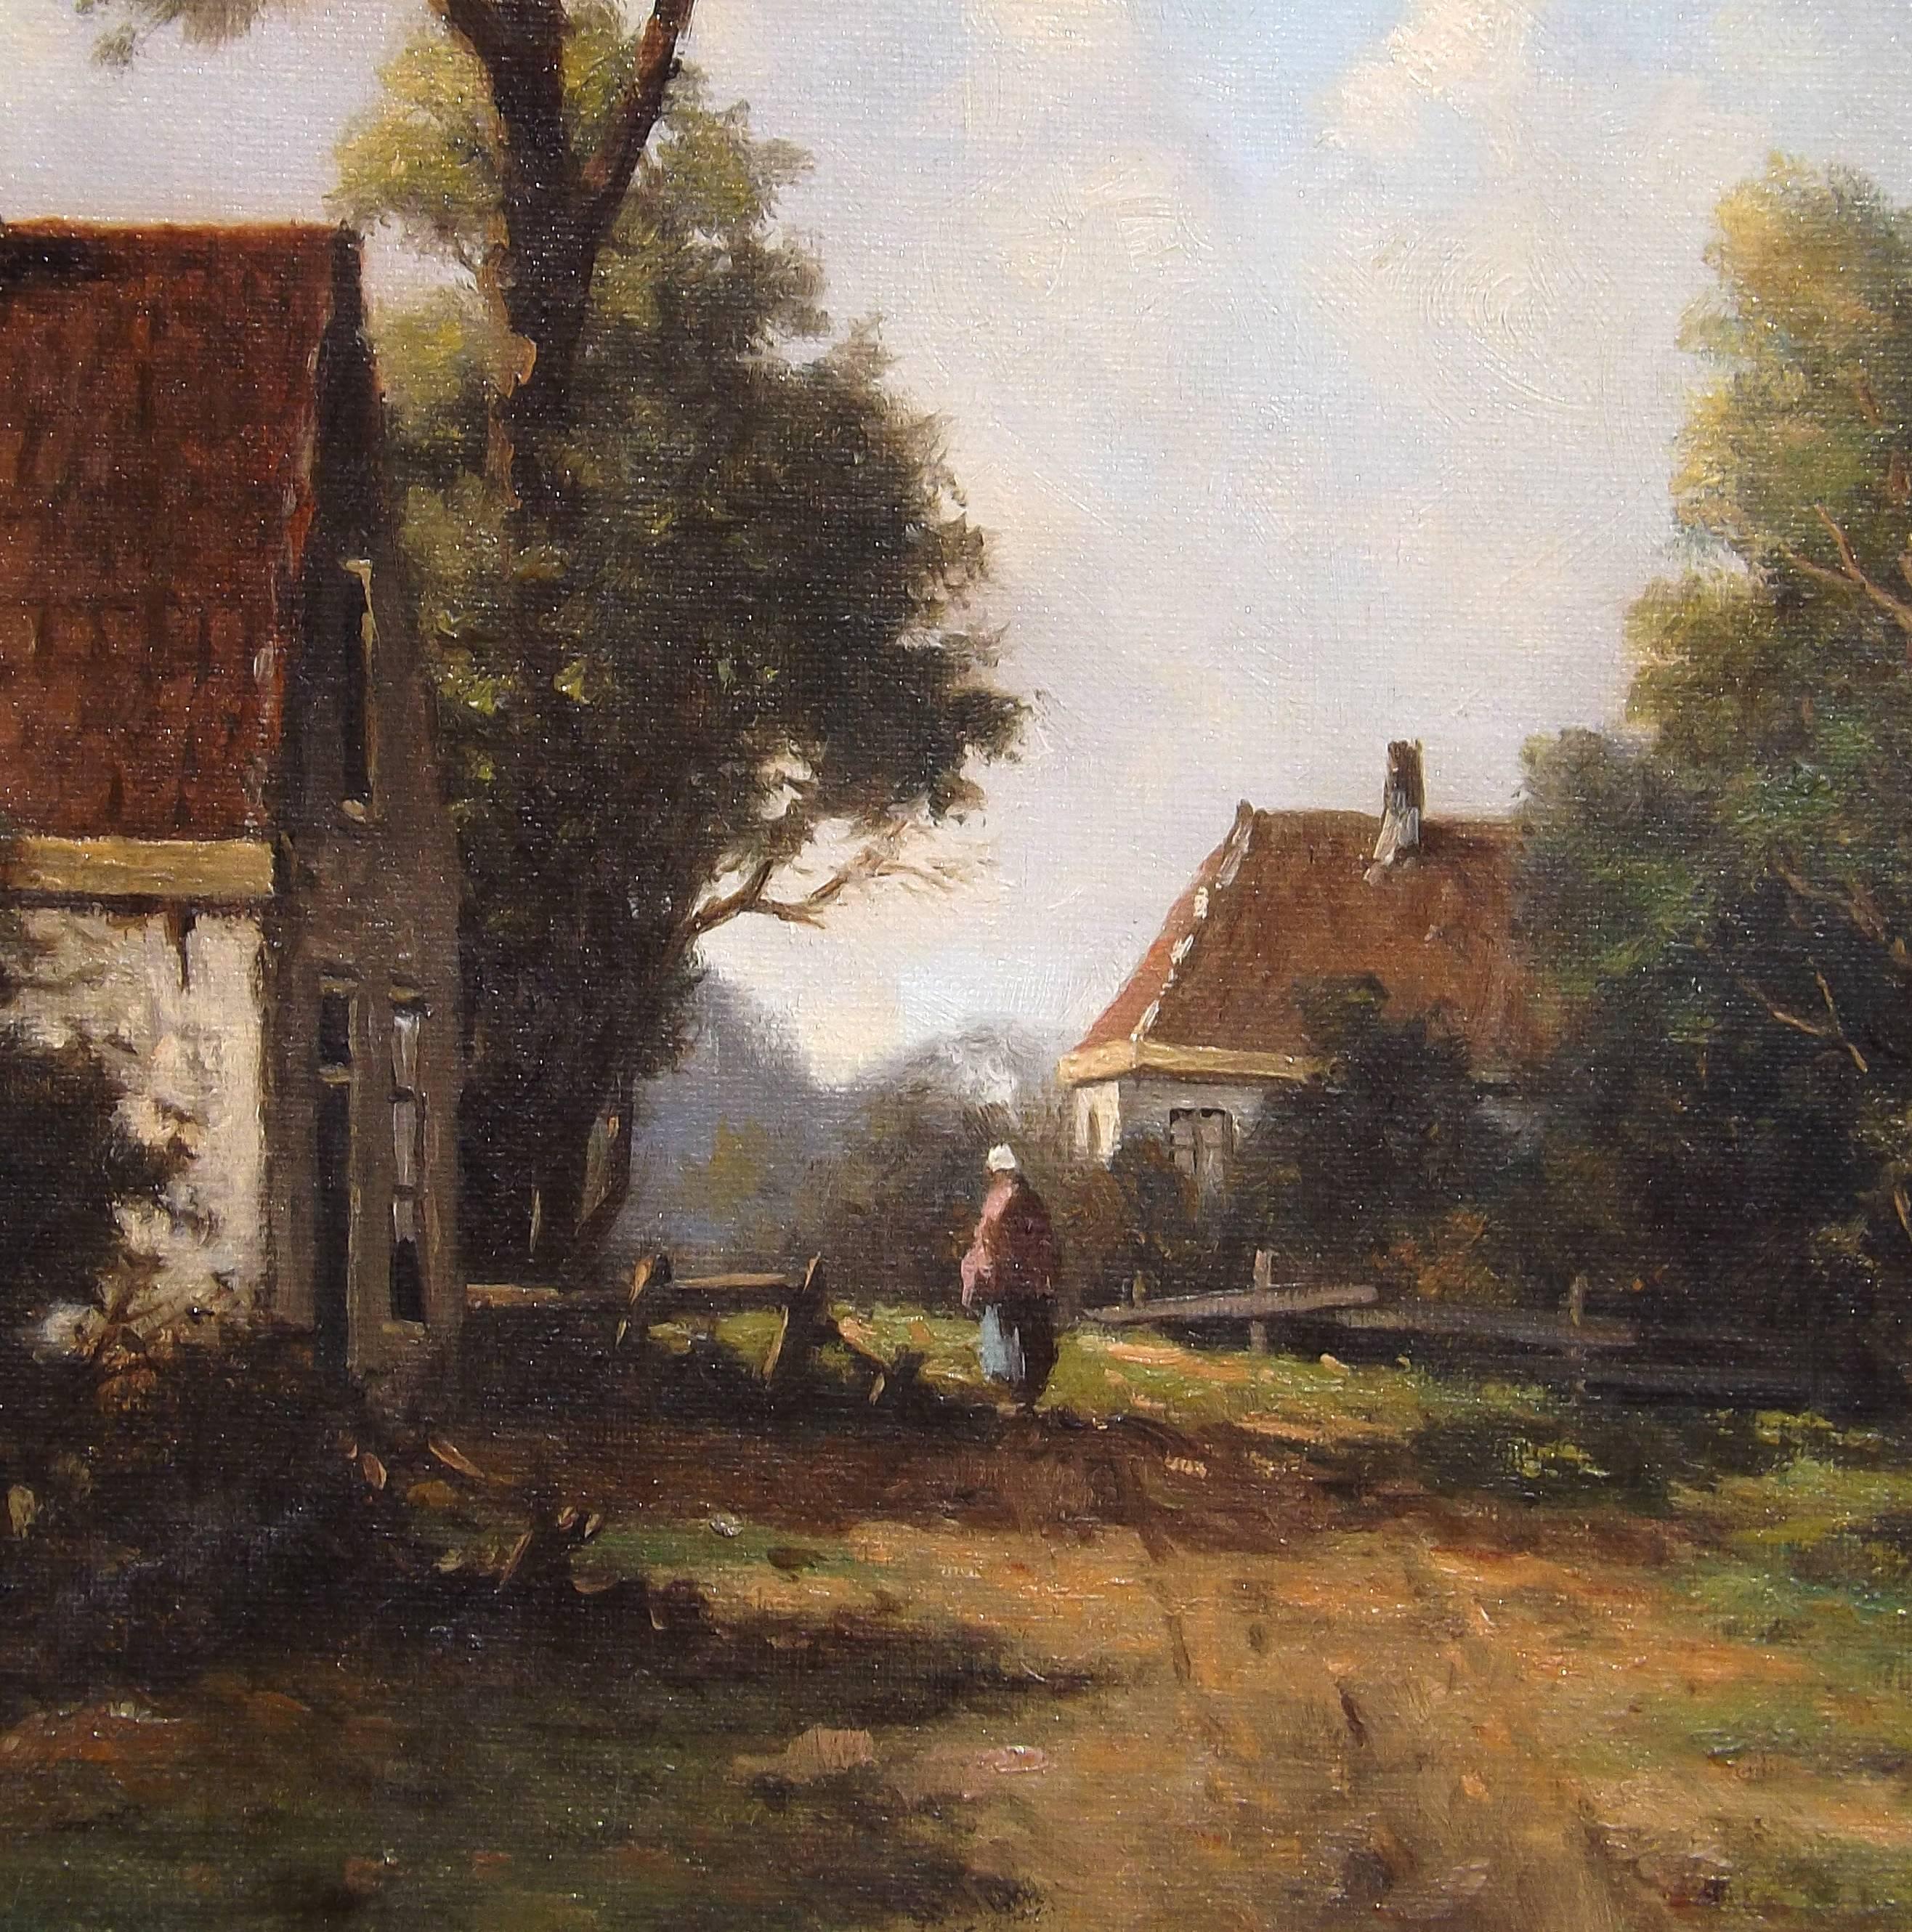 Painted 'An Old Country Lane' Painting by Dutch Painter Adriaan Geijp